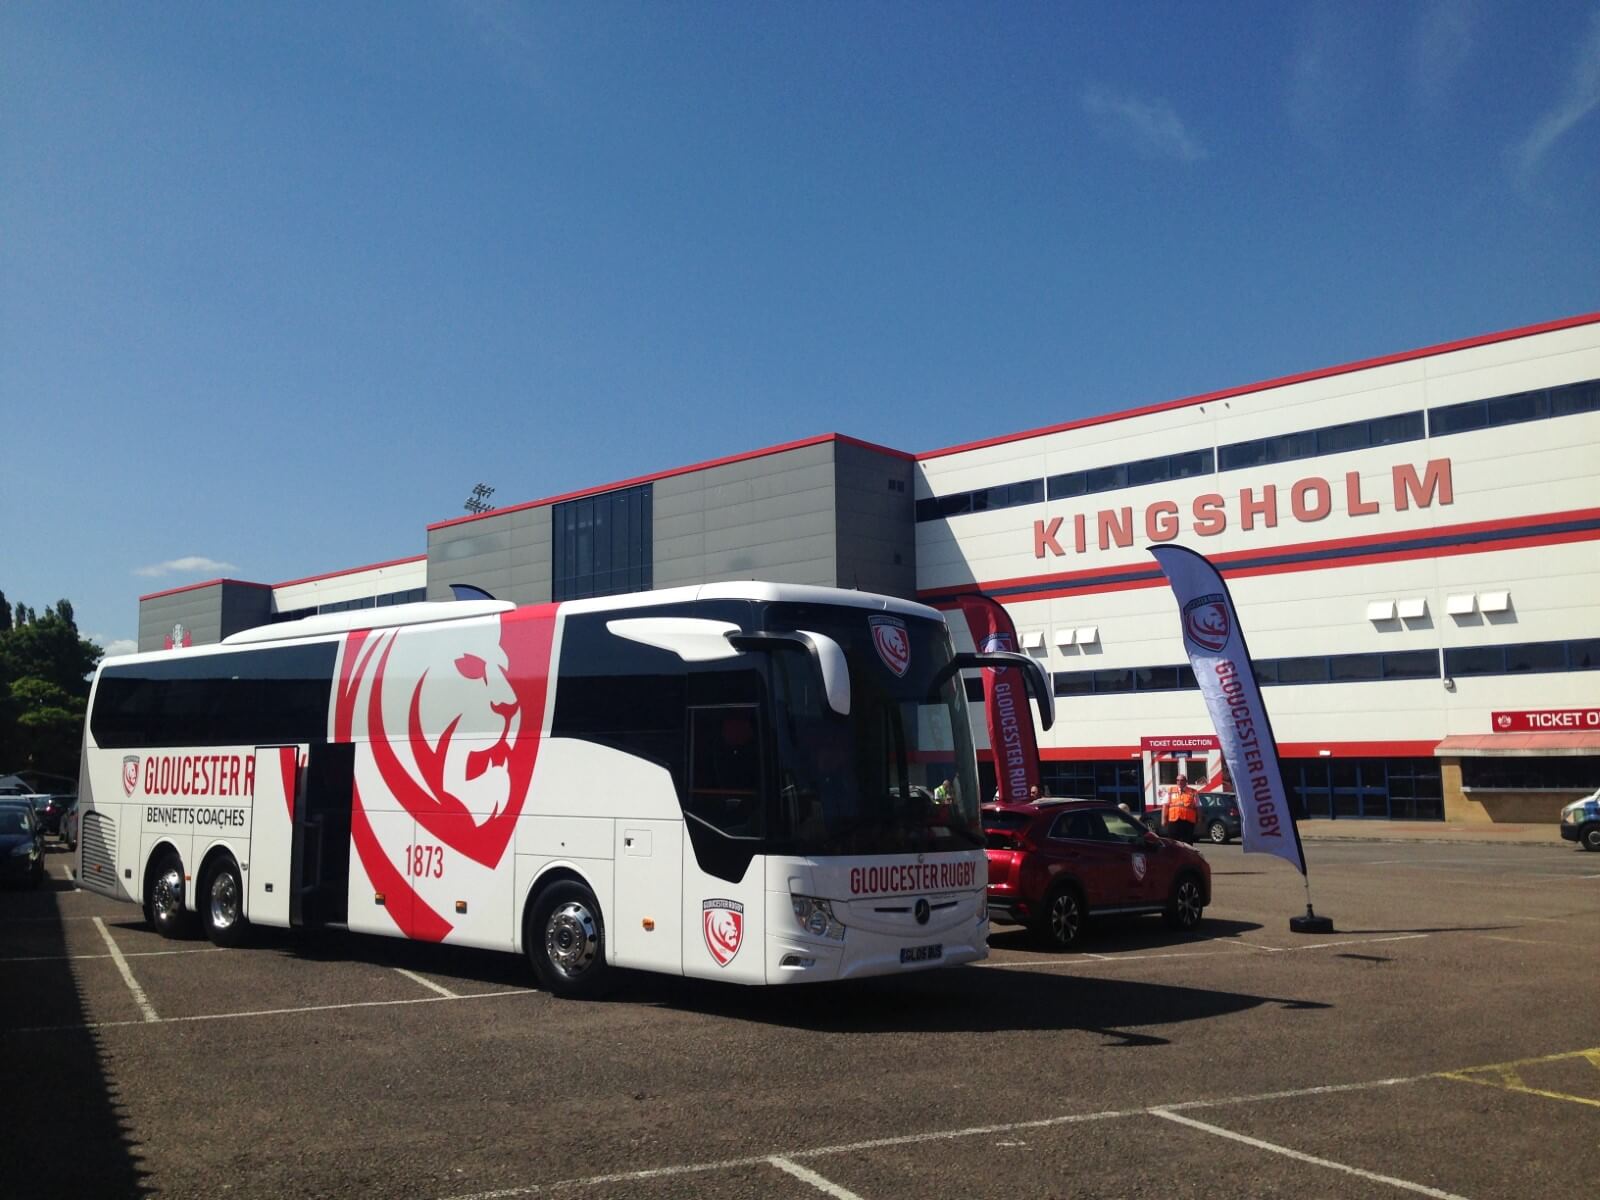 Gloucester Rugby Club Coach Kingsholm